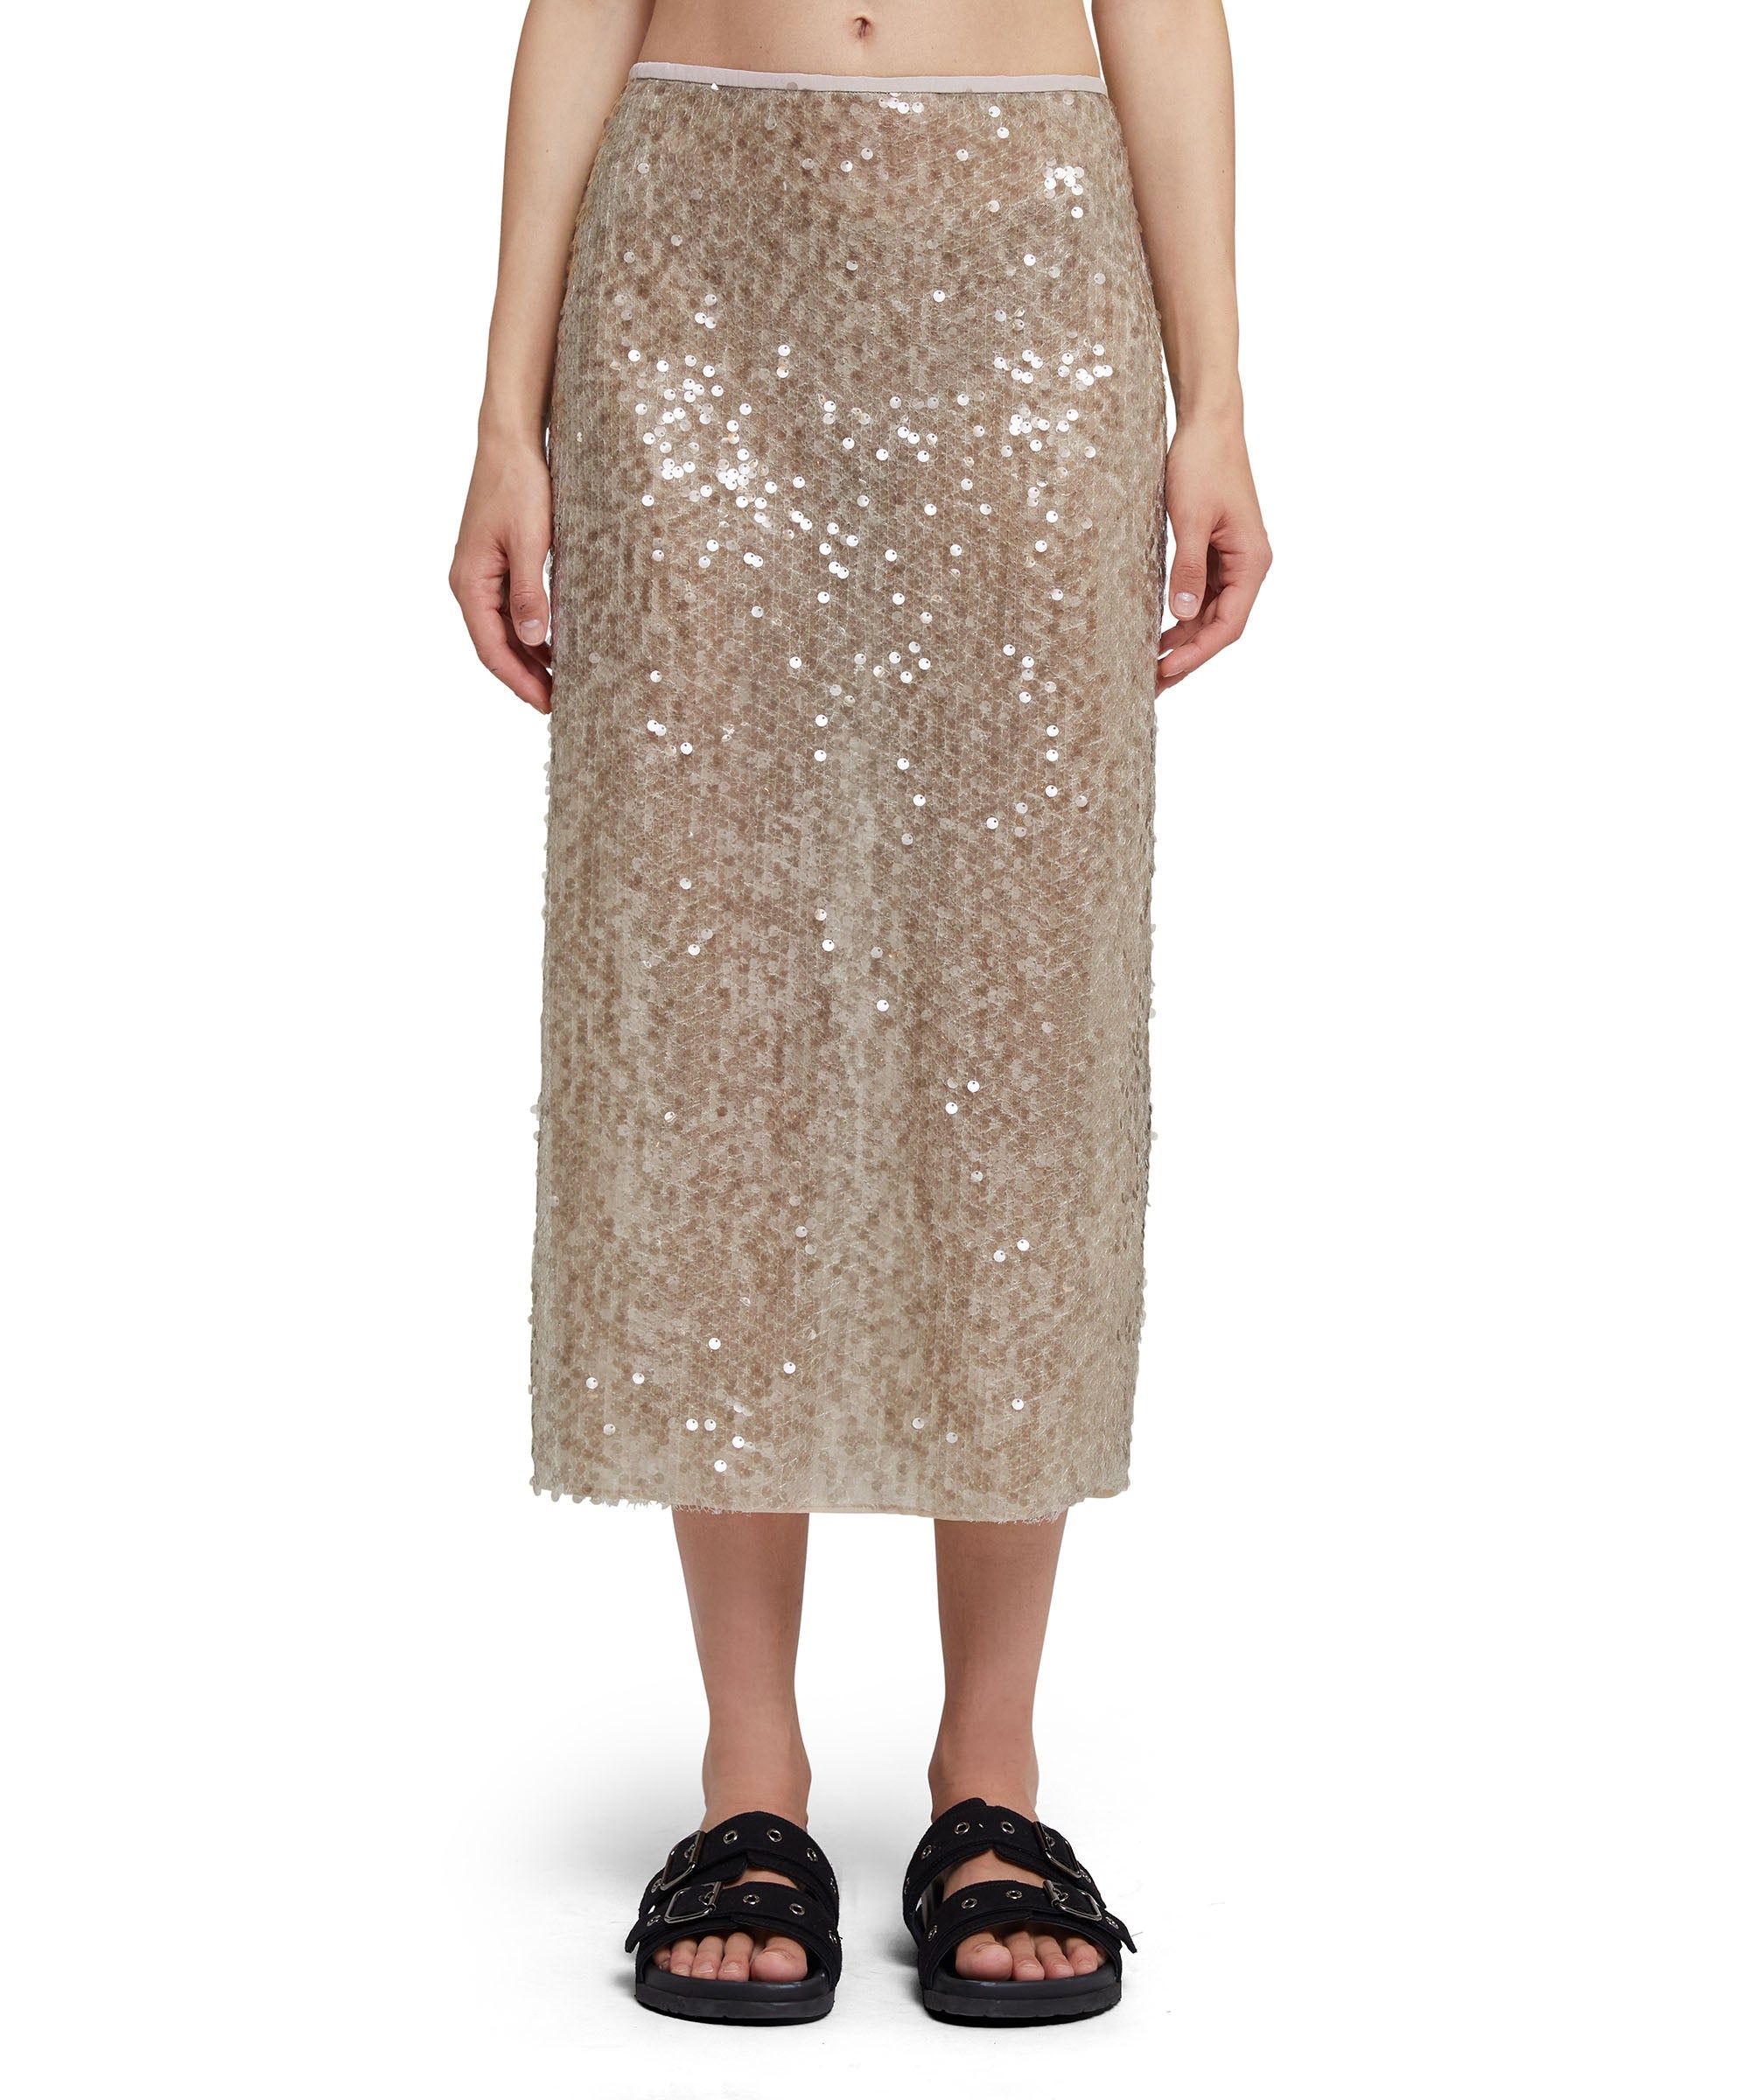 Midi dress with sequined fabric - 2